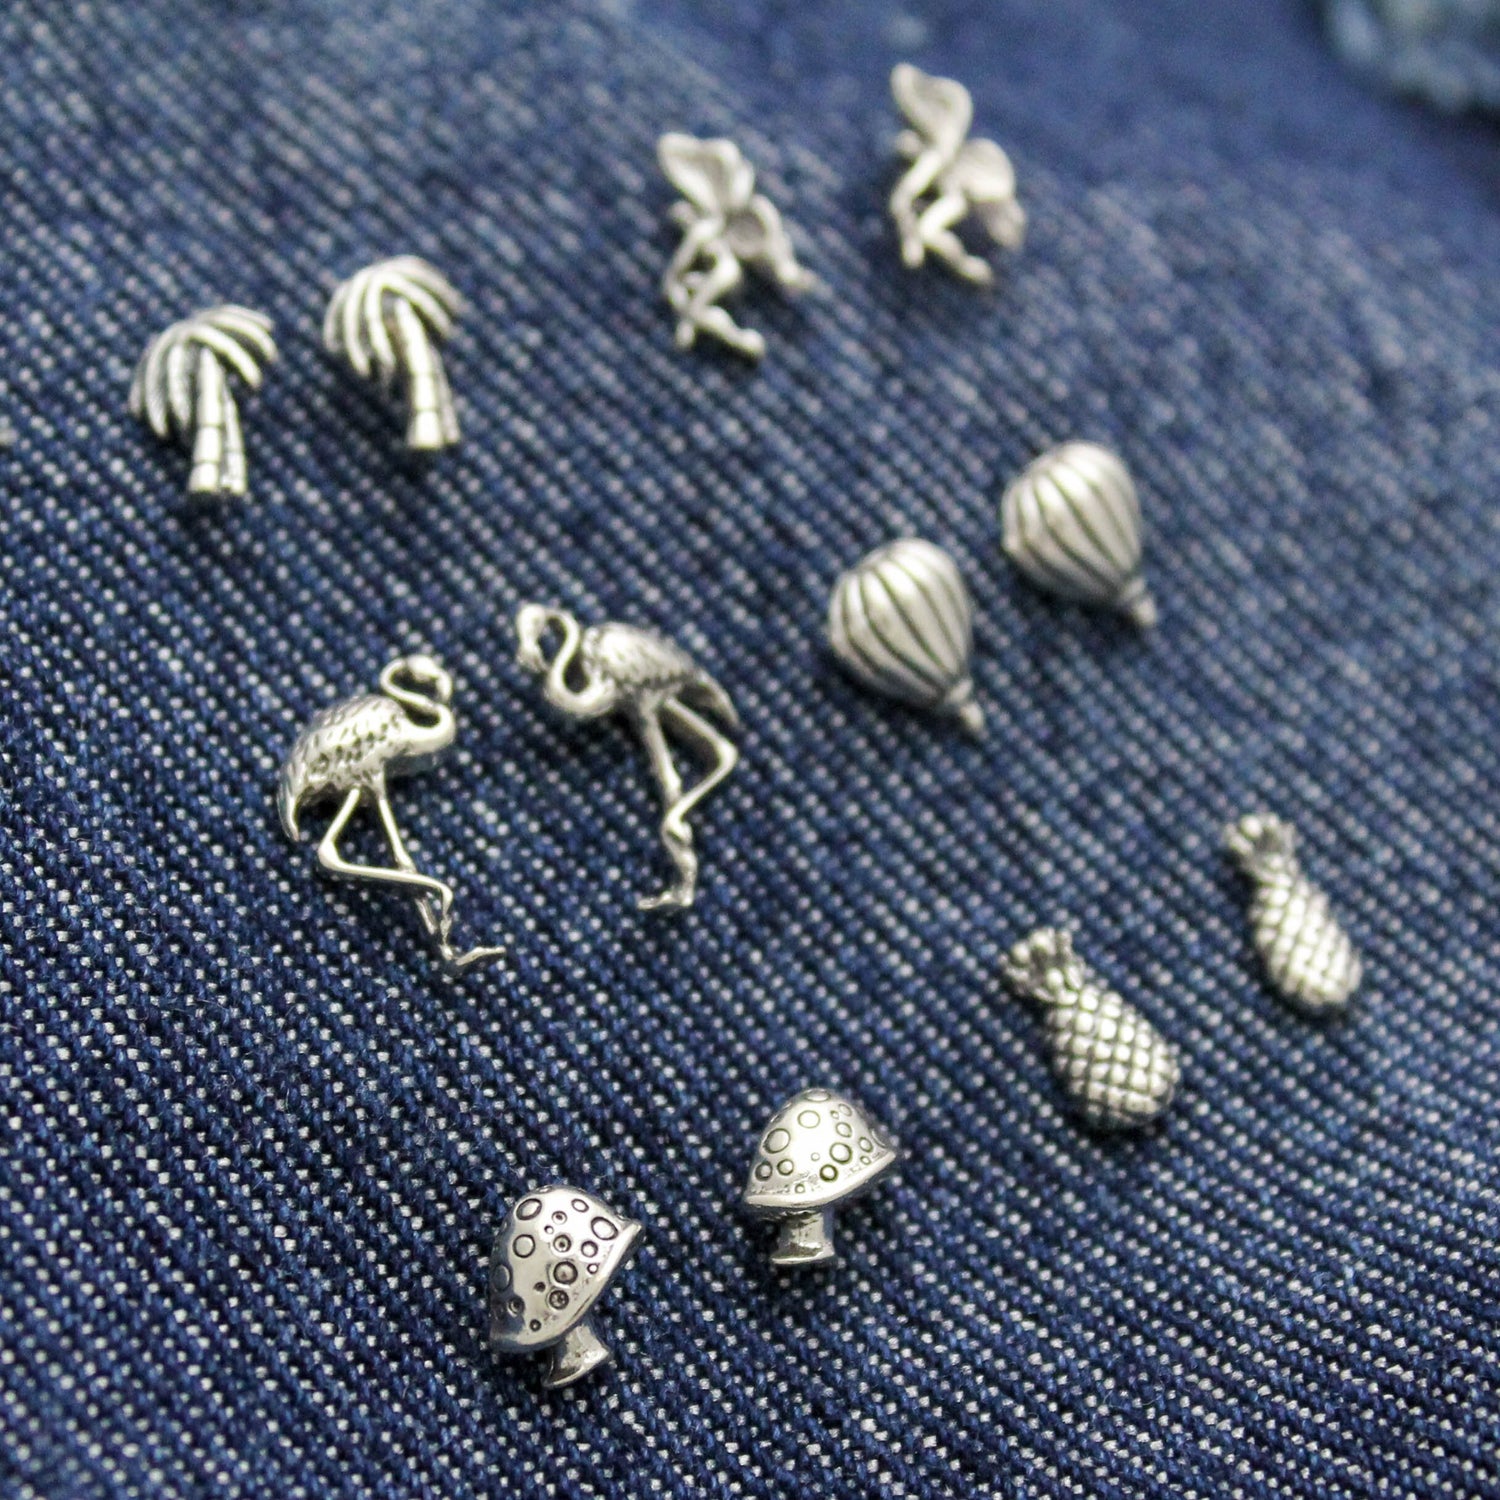 Palm Tree Studs in Sterling Silver, Mushroom, Flamingo, Fairy, Hot Air Balloon, & Pineapple Silver Stud Earrings, Gift for Her, Funky Studs